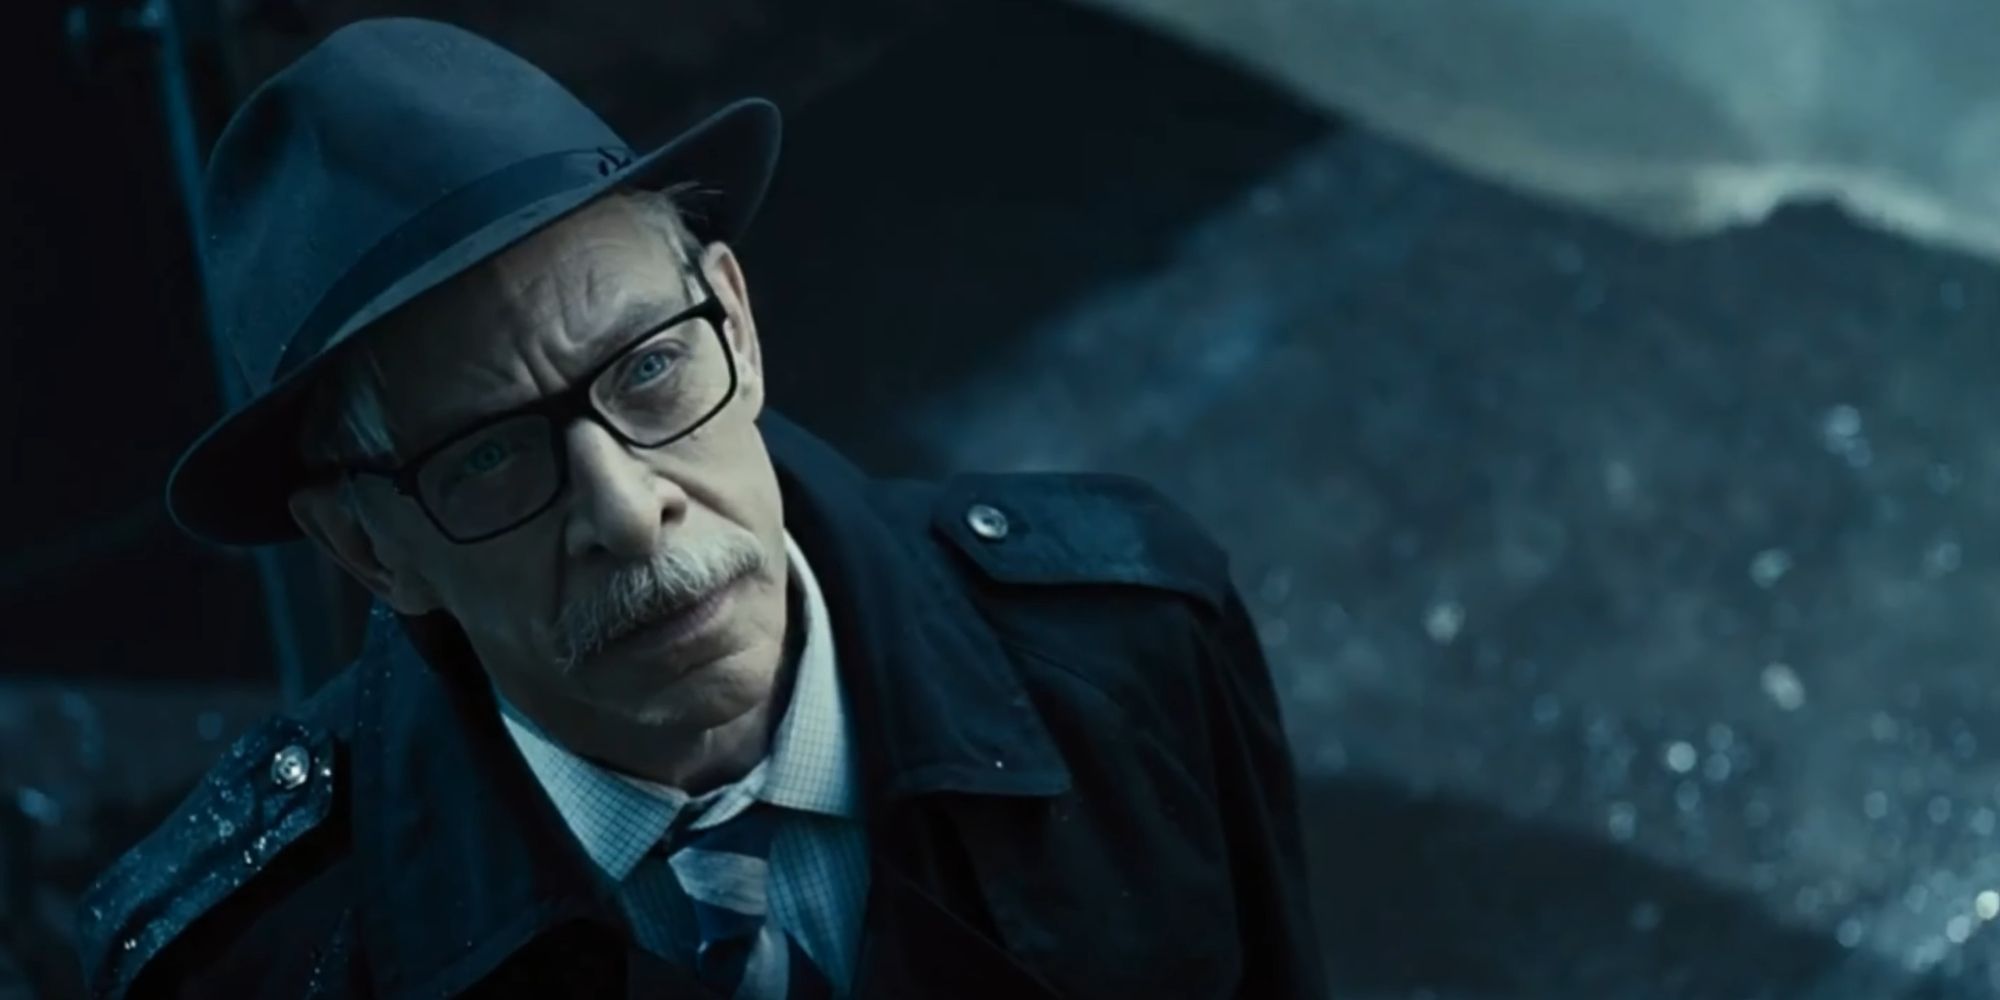 J.K. Simmons as Jim Gordon in Zack Snyders Justice League